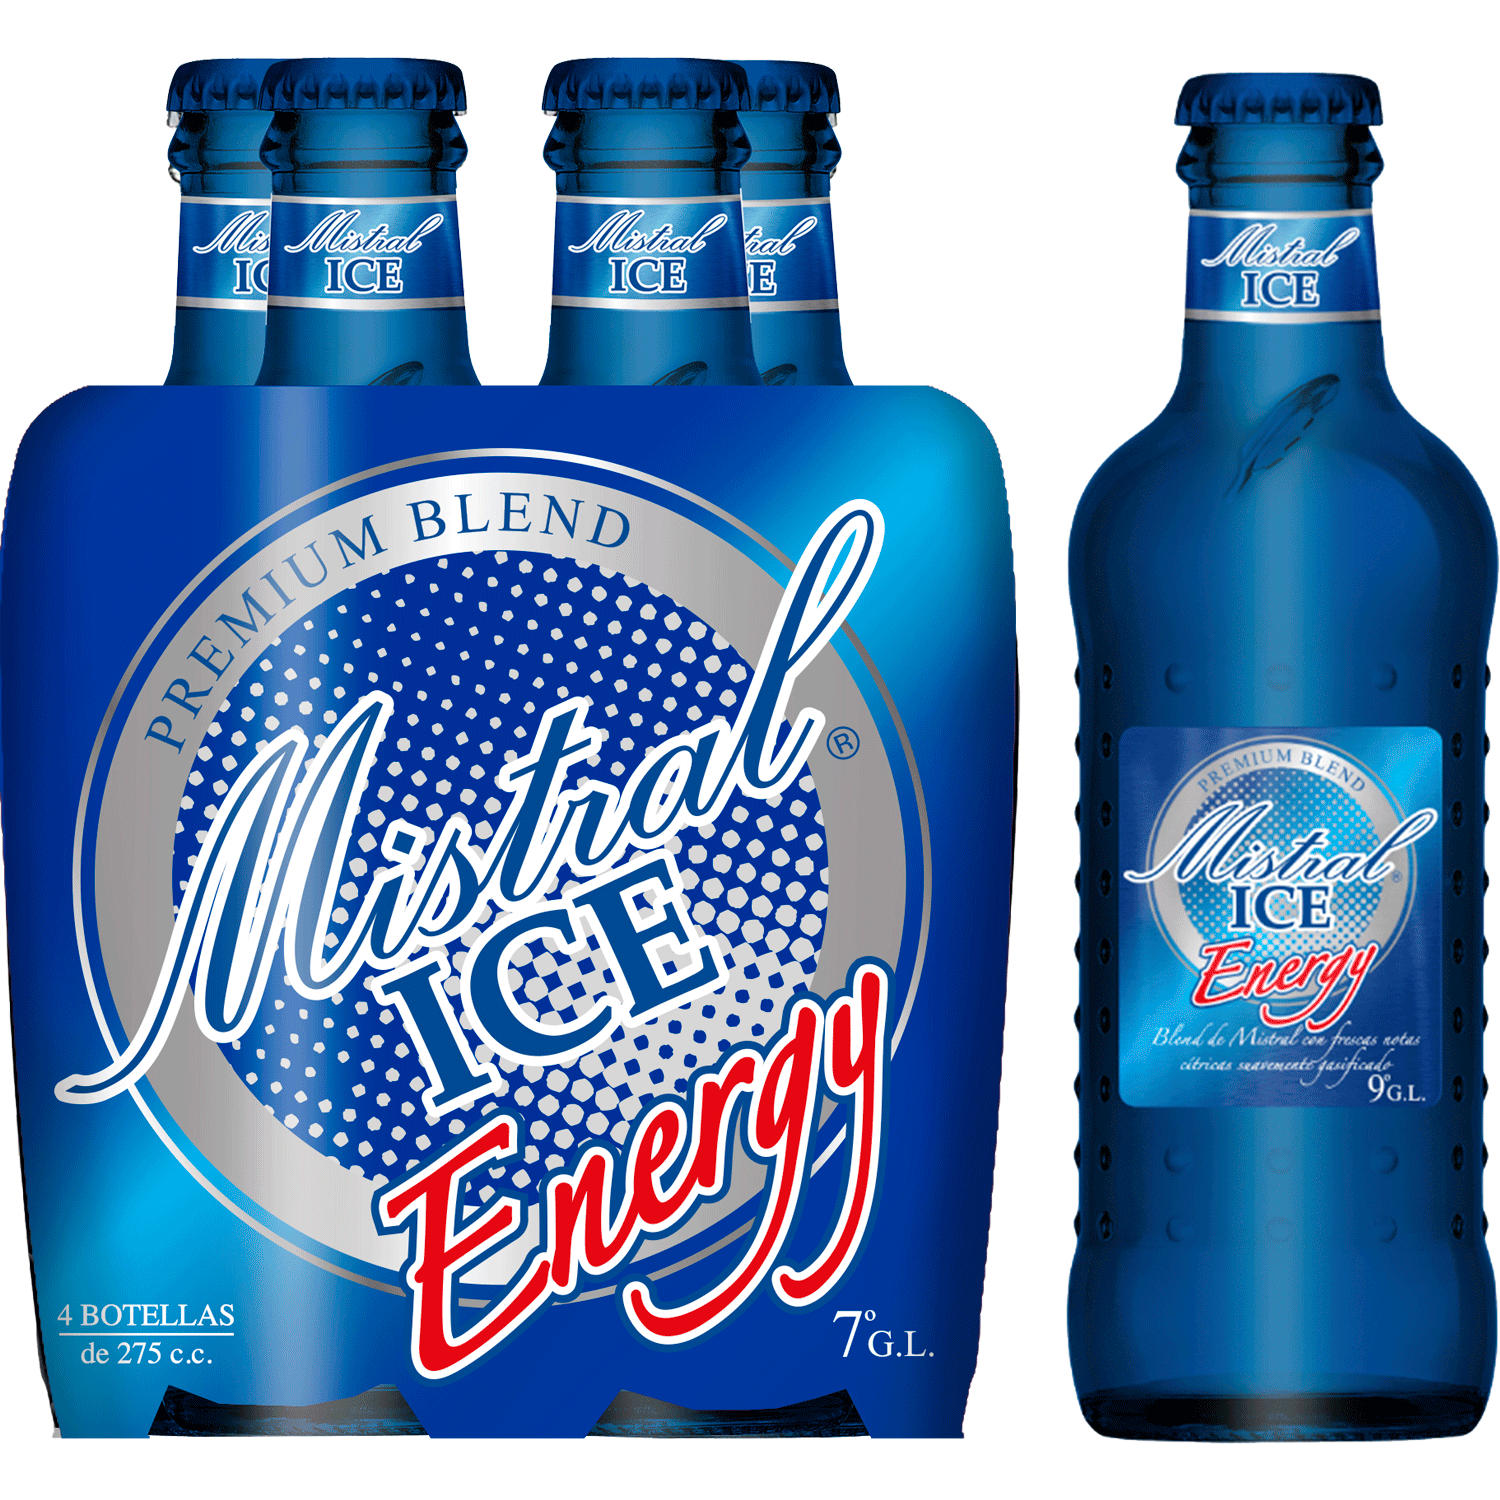 PACK MISTRAL ICE ENERGY 4 BOTELLAS